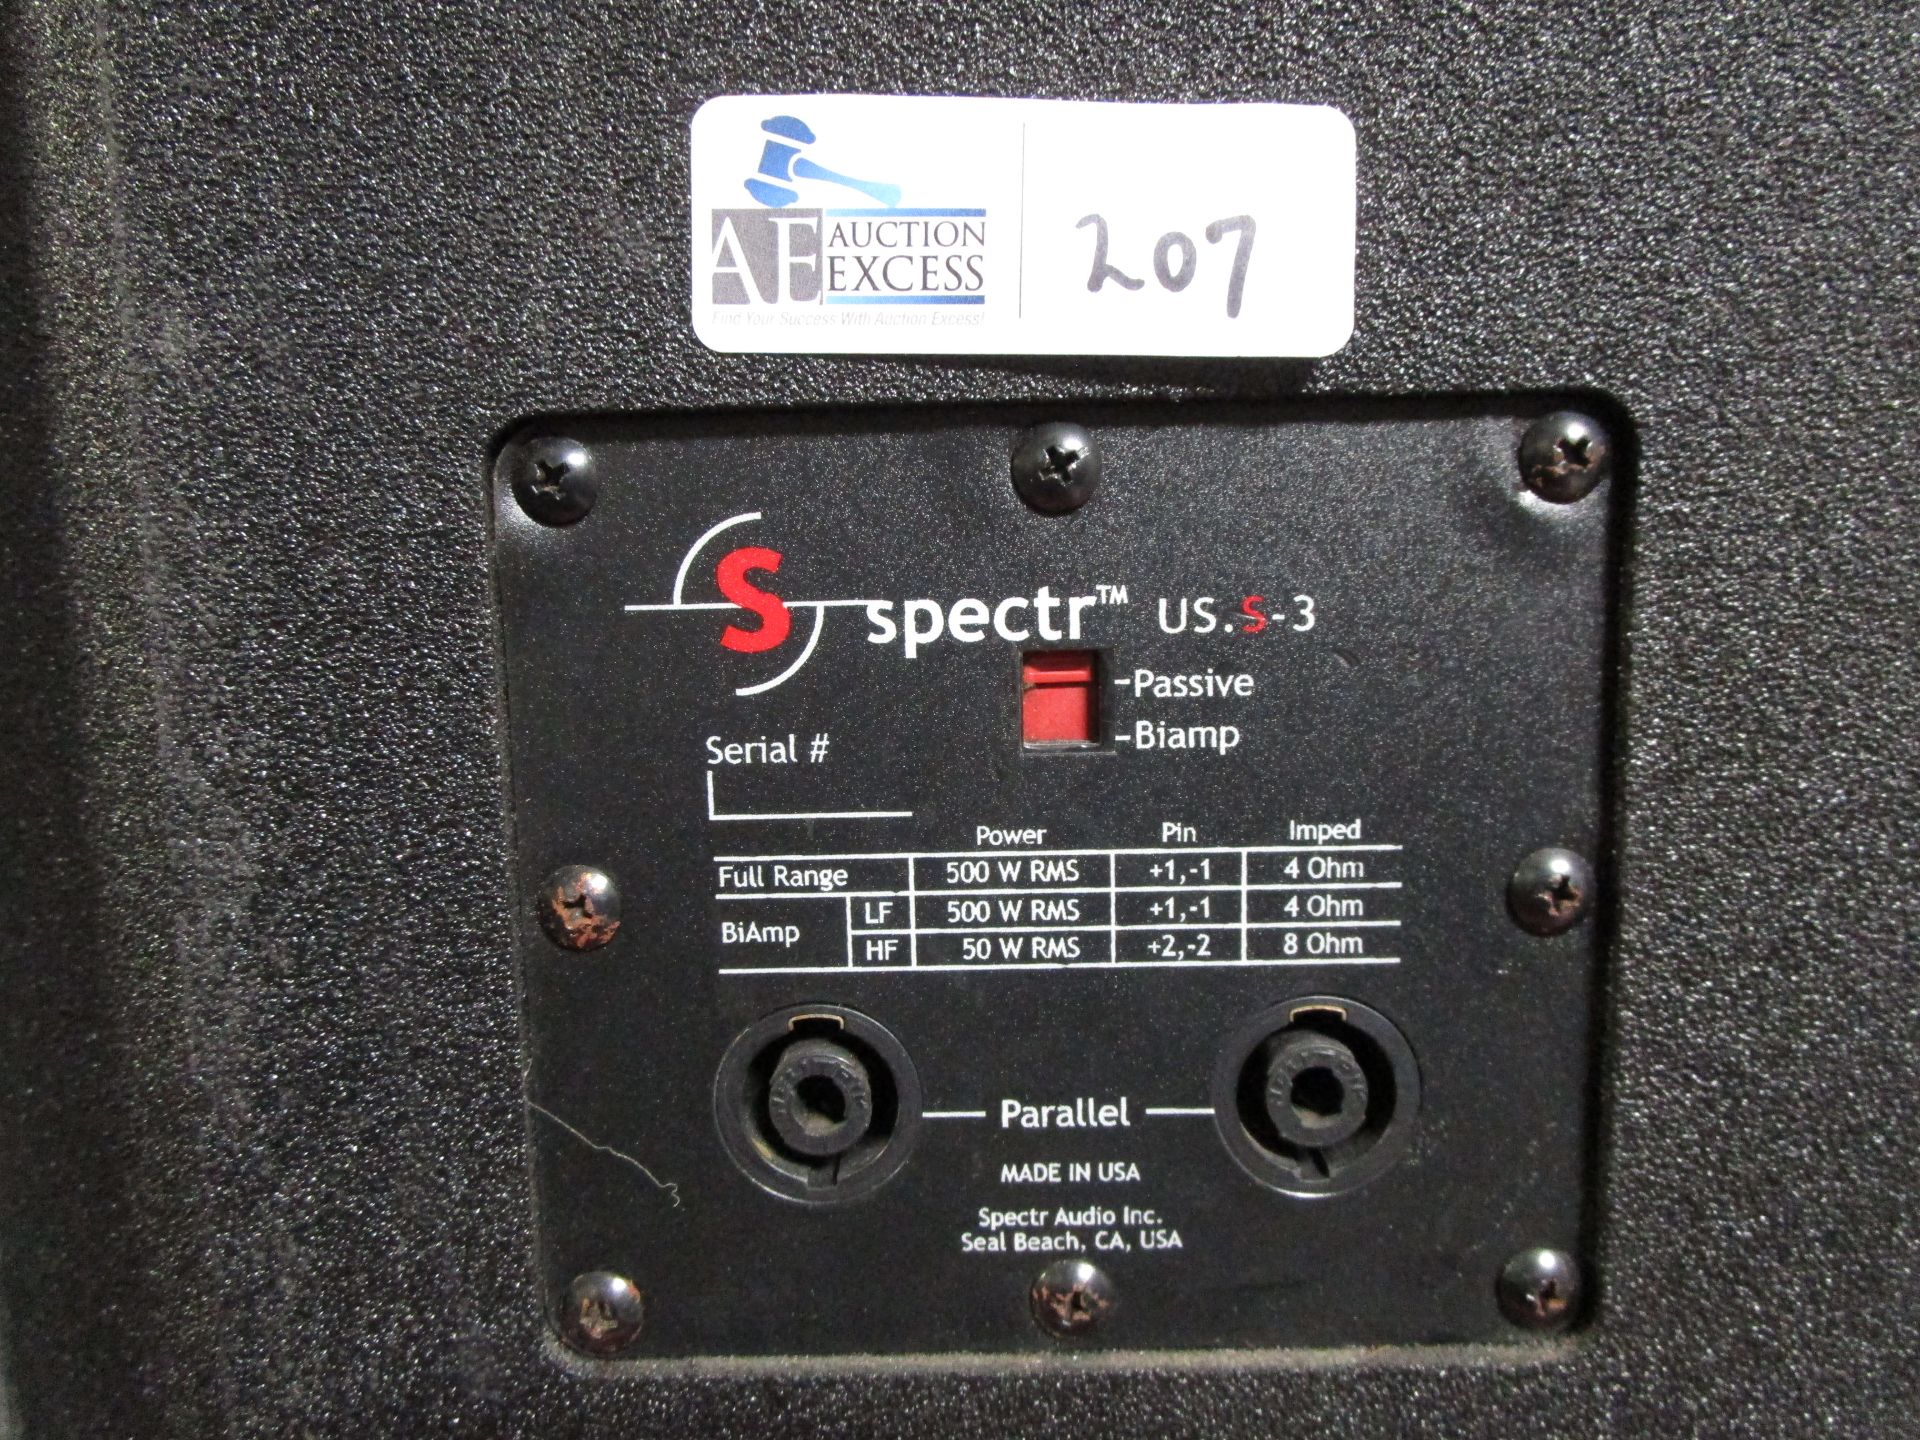 LOT OF 2 SPECTR US.S-3 WEDGE MONITORS - Image 3 of 3